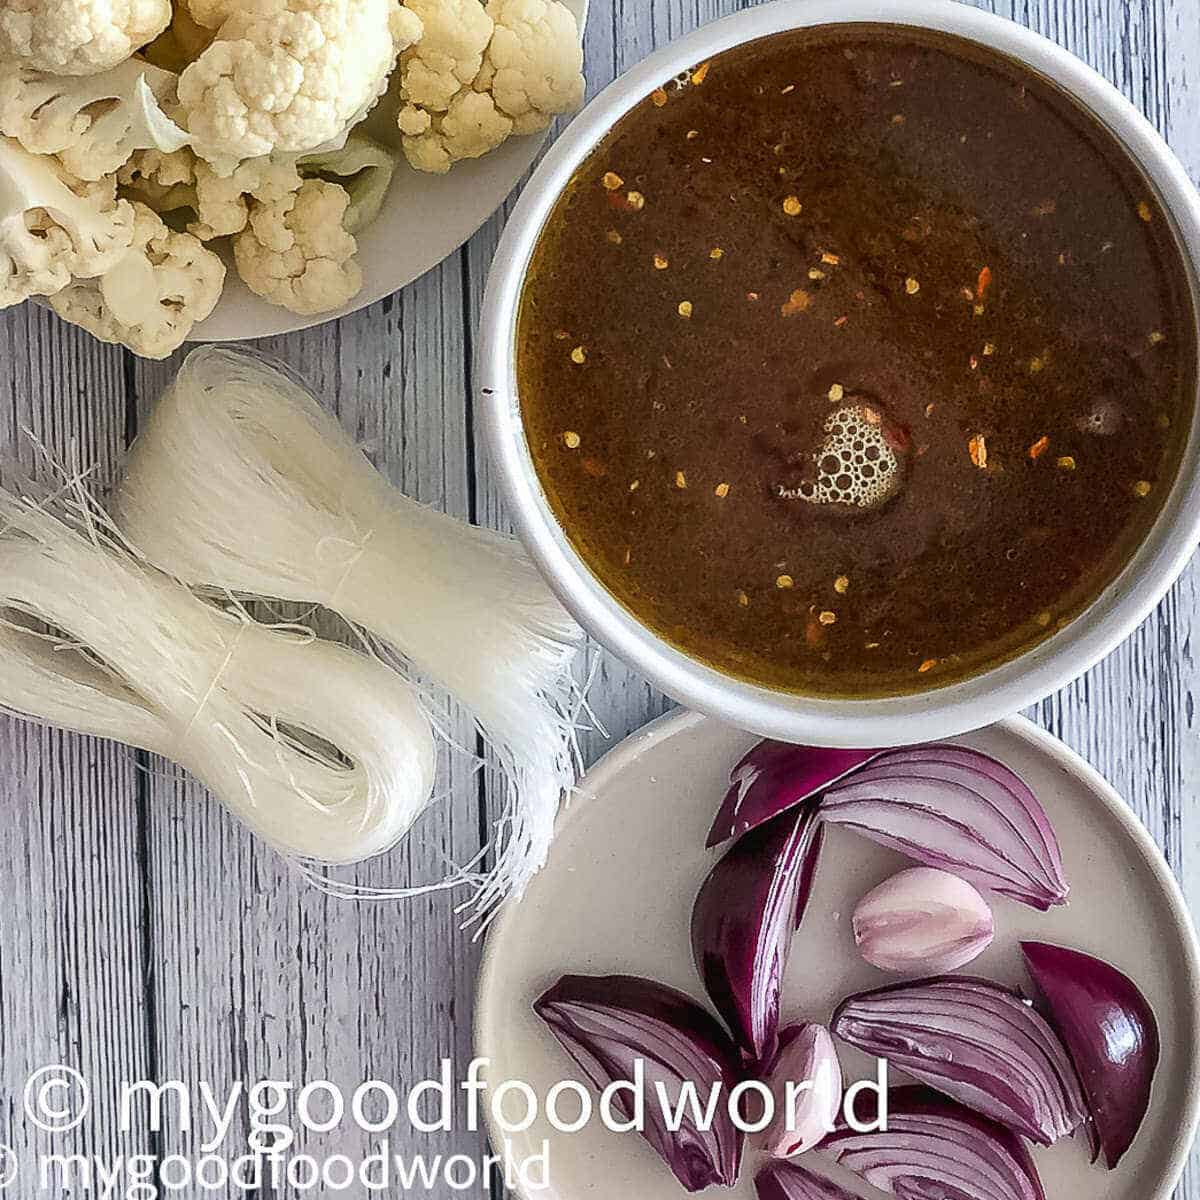 Spicy teriyaki broth placed in a white round bowl with cauliflower florets, onion wedges and glass noodles placed on the side.